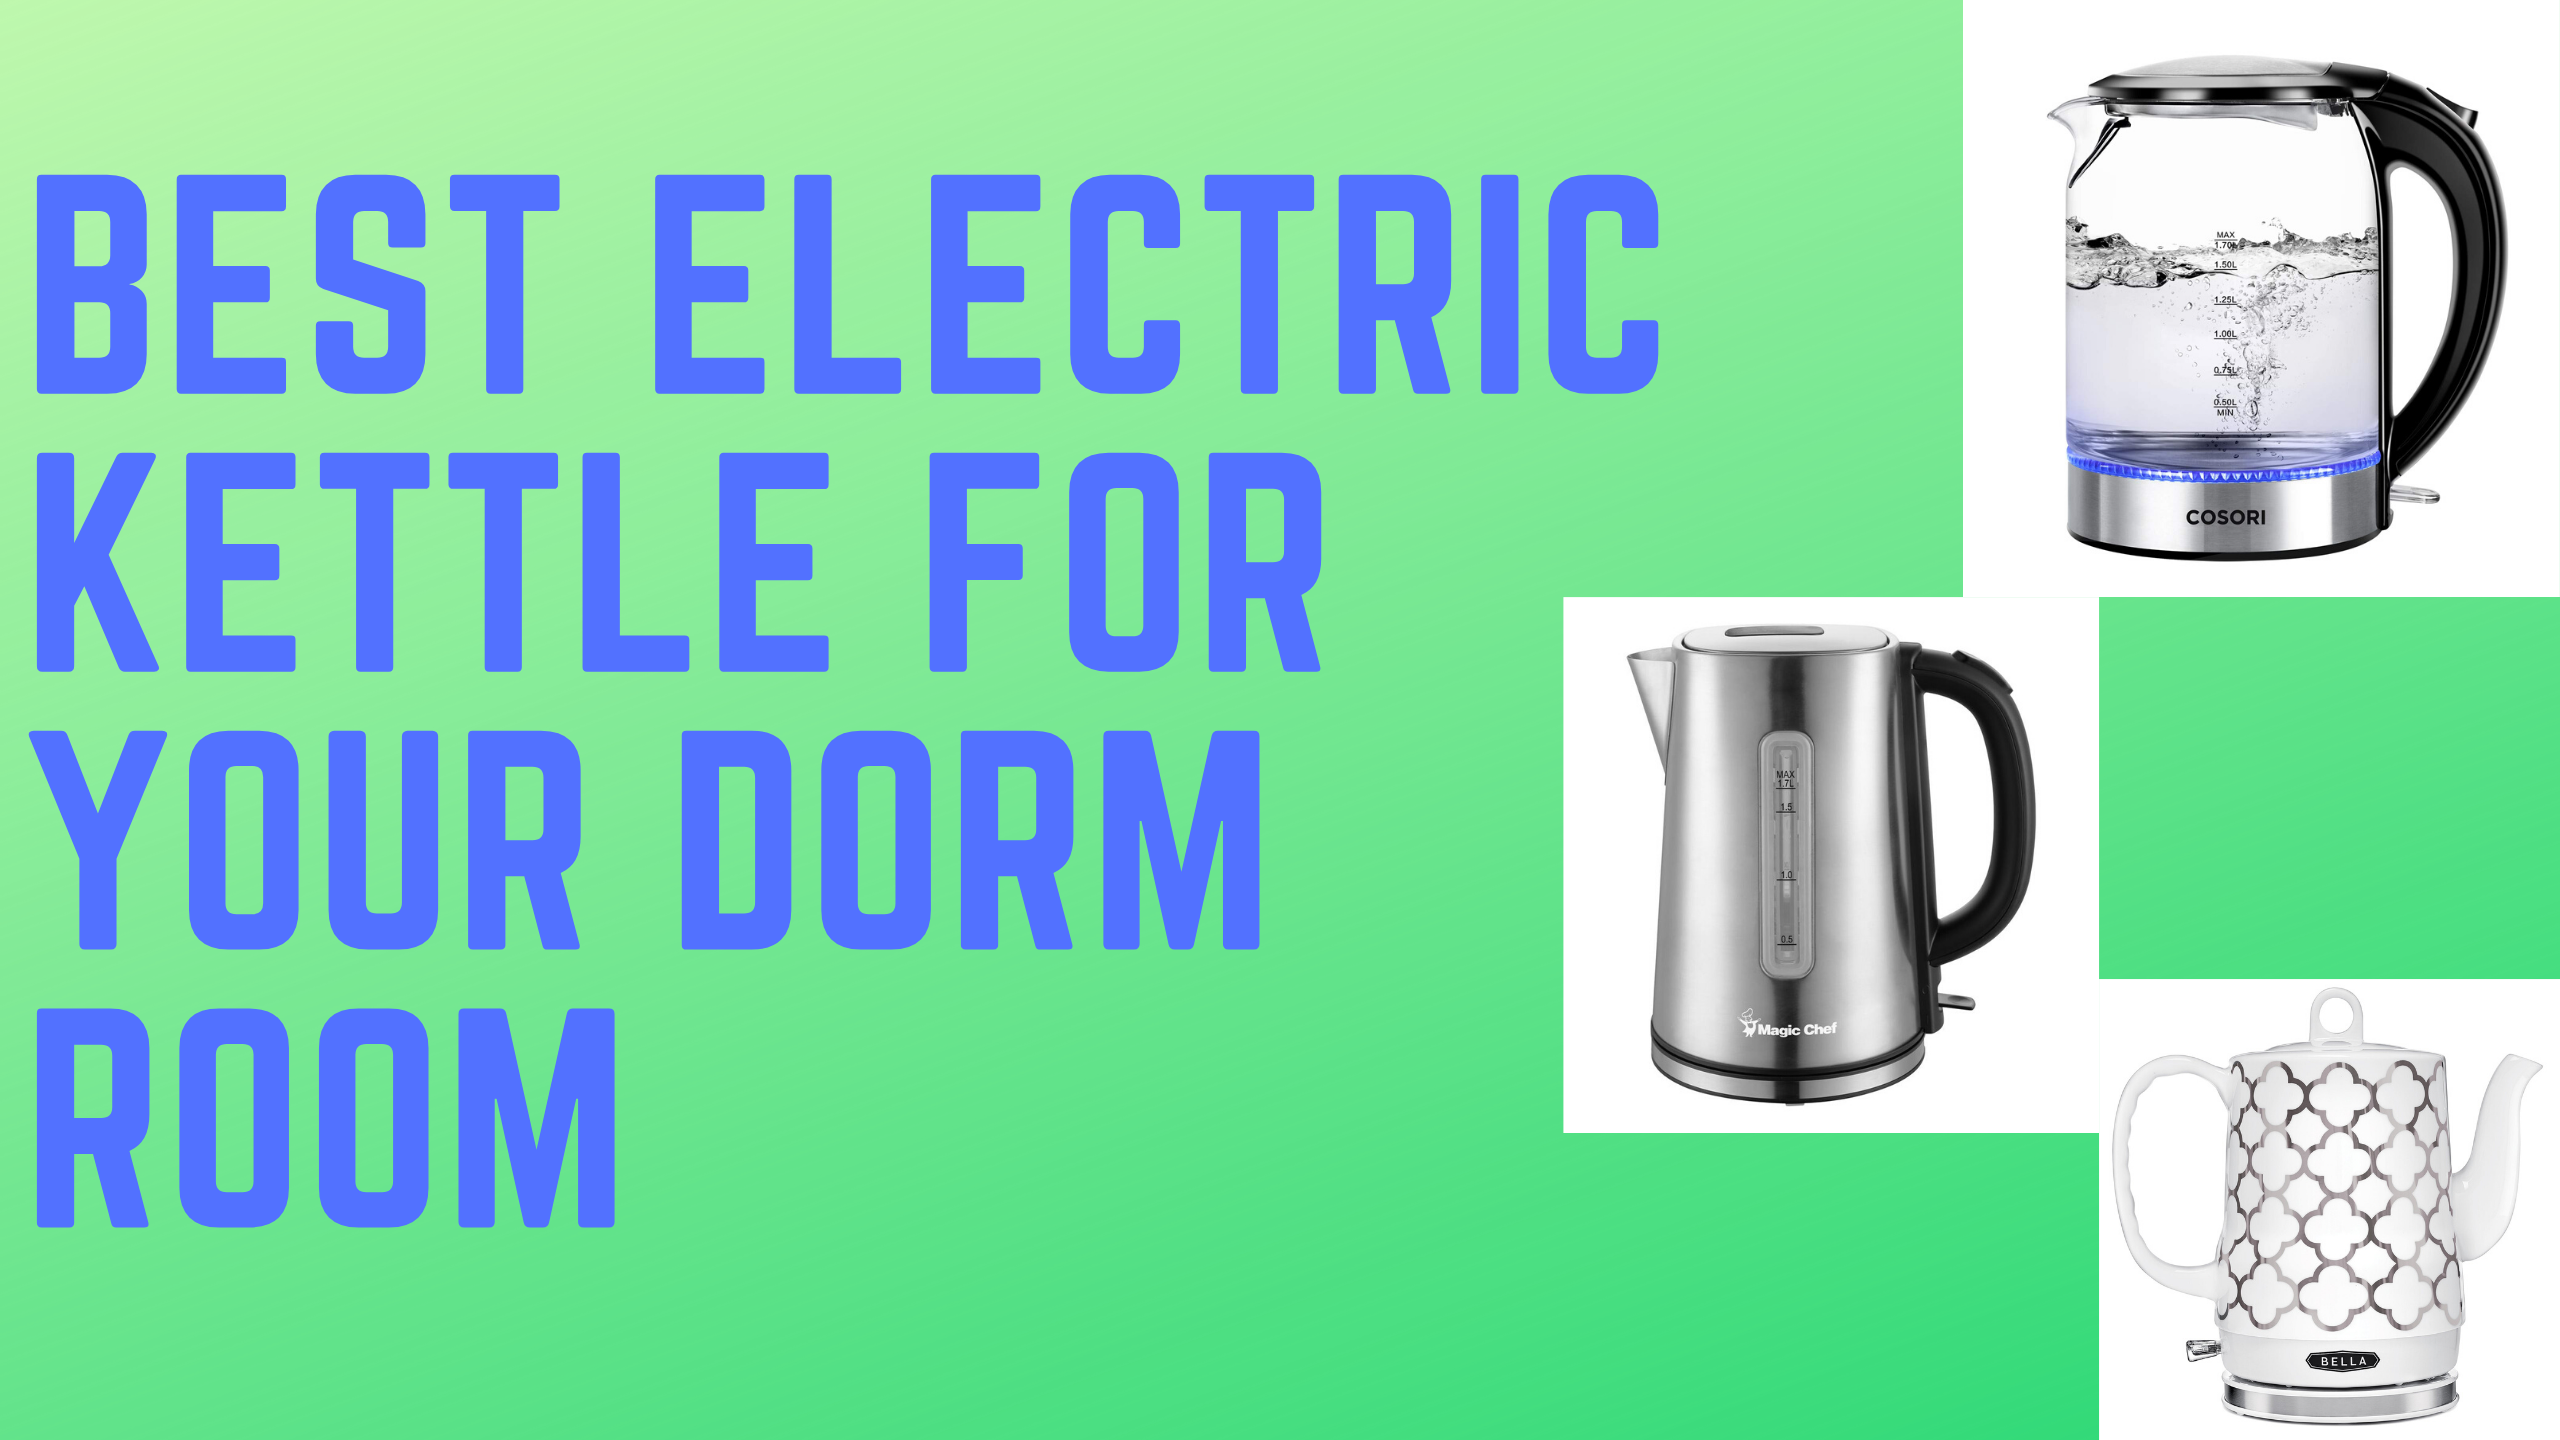 https://www.electrickettlesguide.com/wp-content/uploads/2020/01/Best-Electric-Kettle-For-Your-Dorm-Room.png